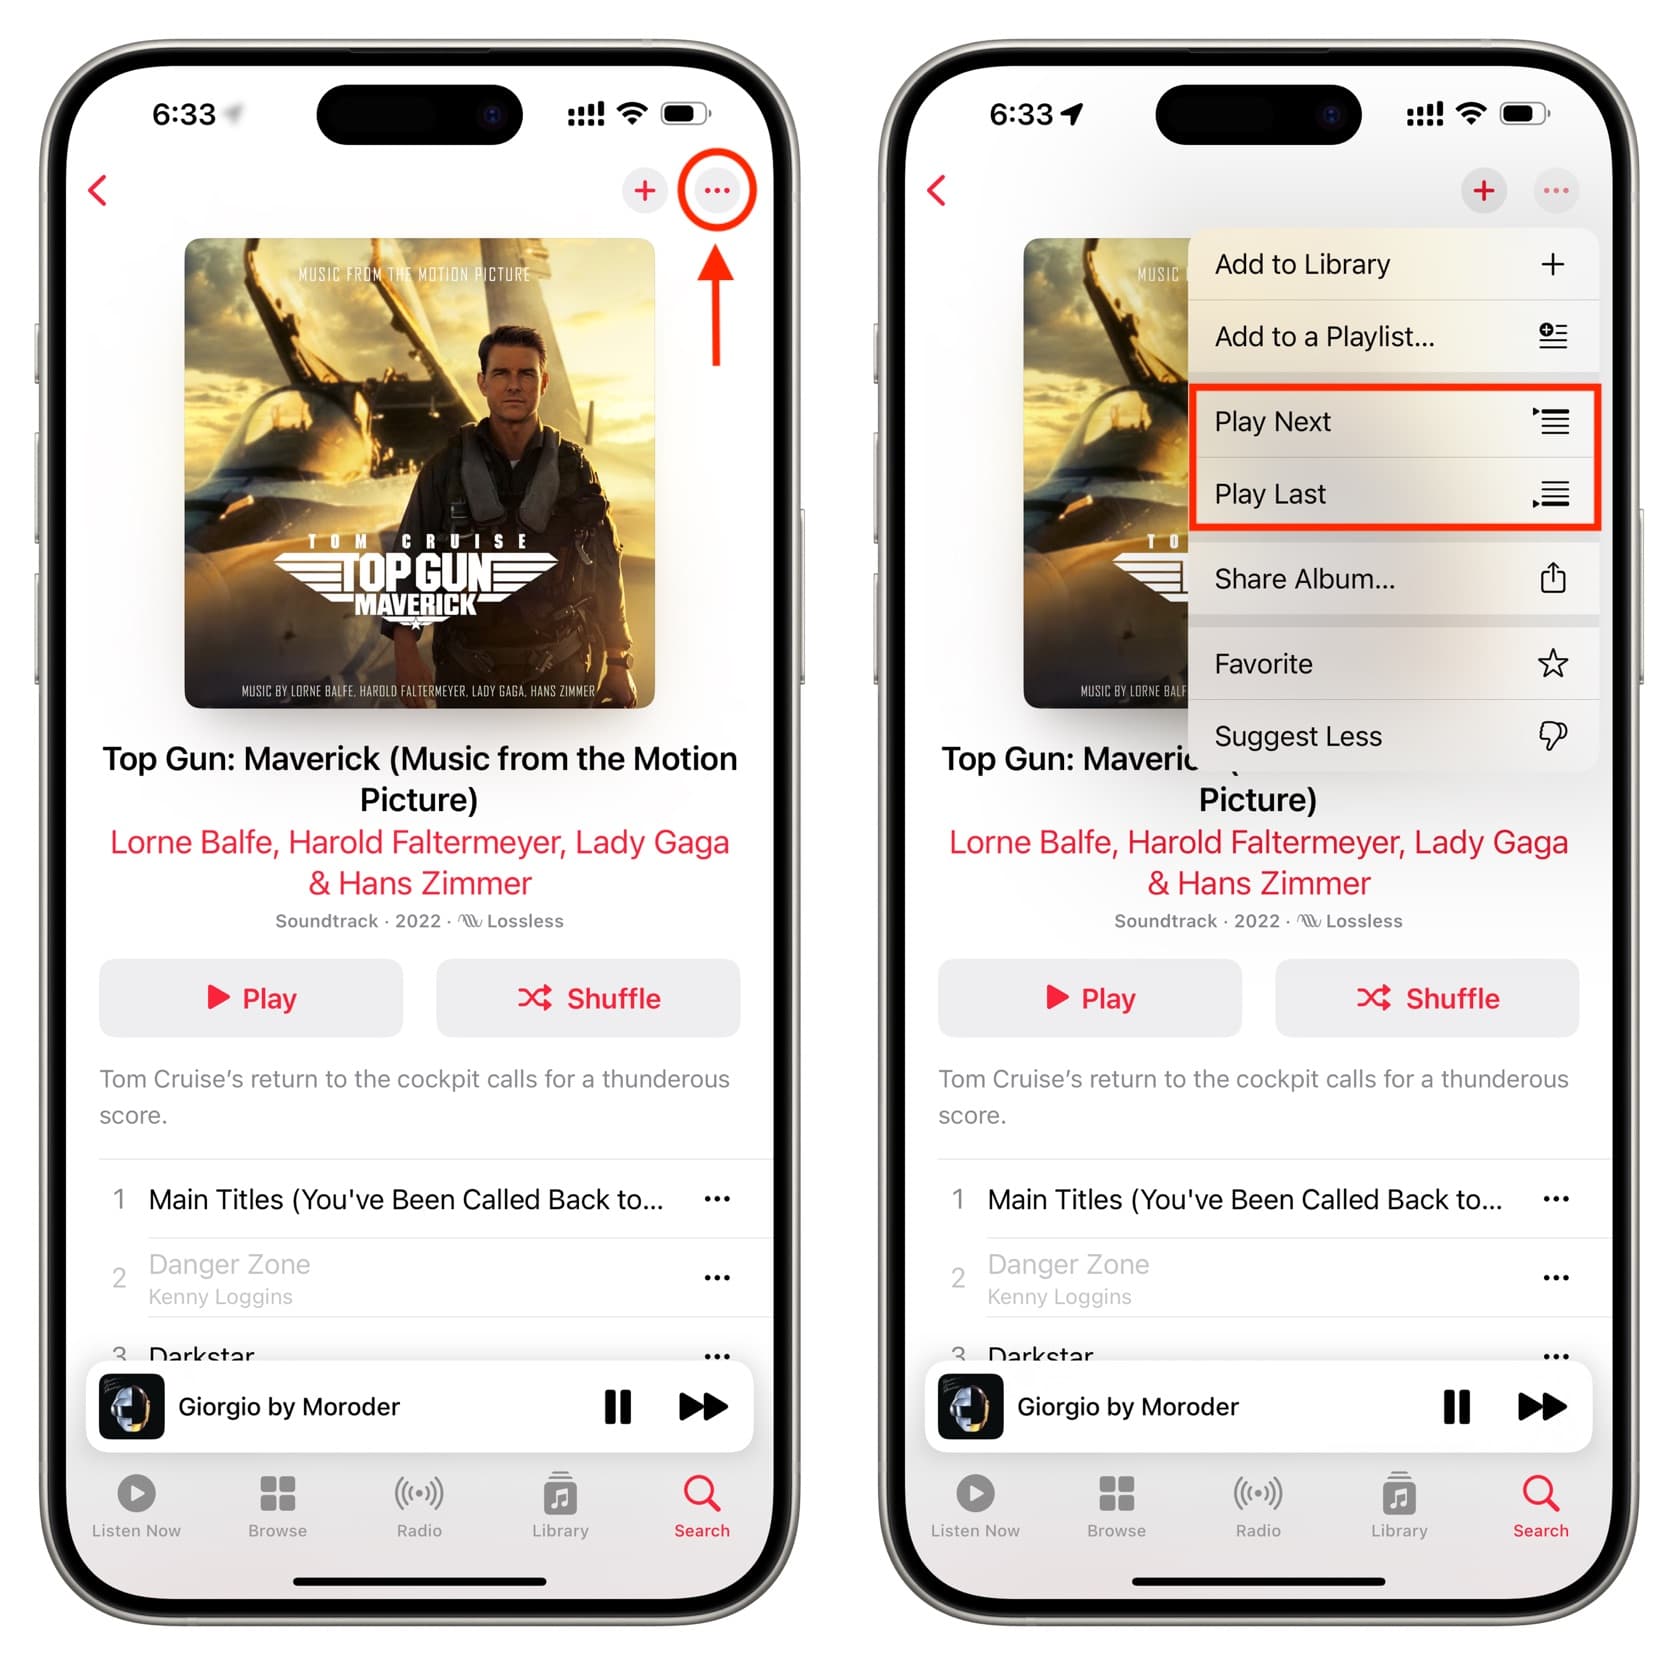 Add to play next in the queue in iOS Music app